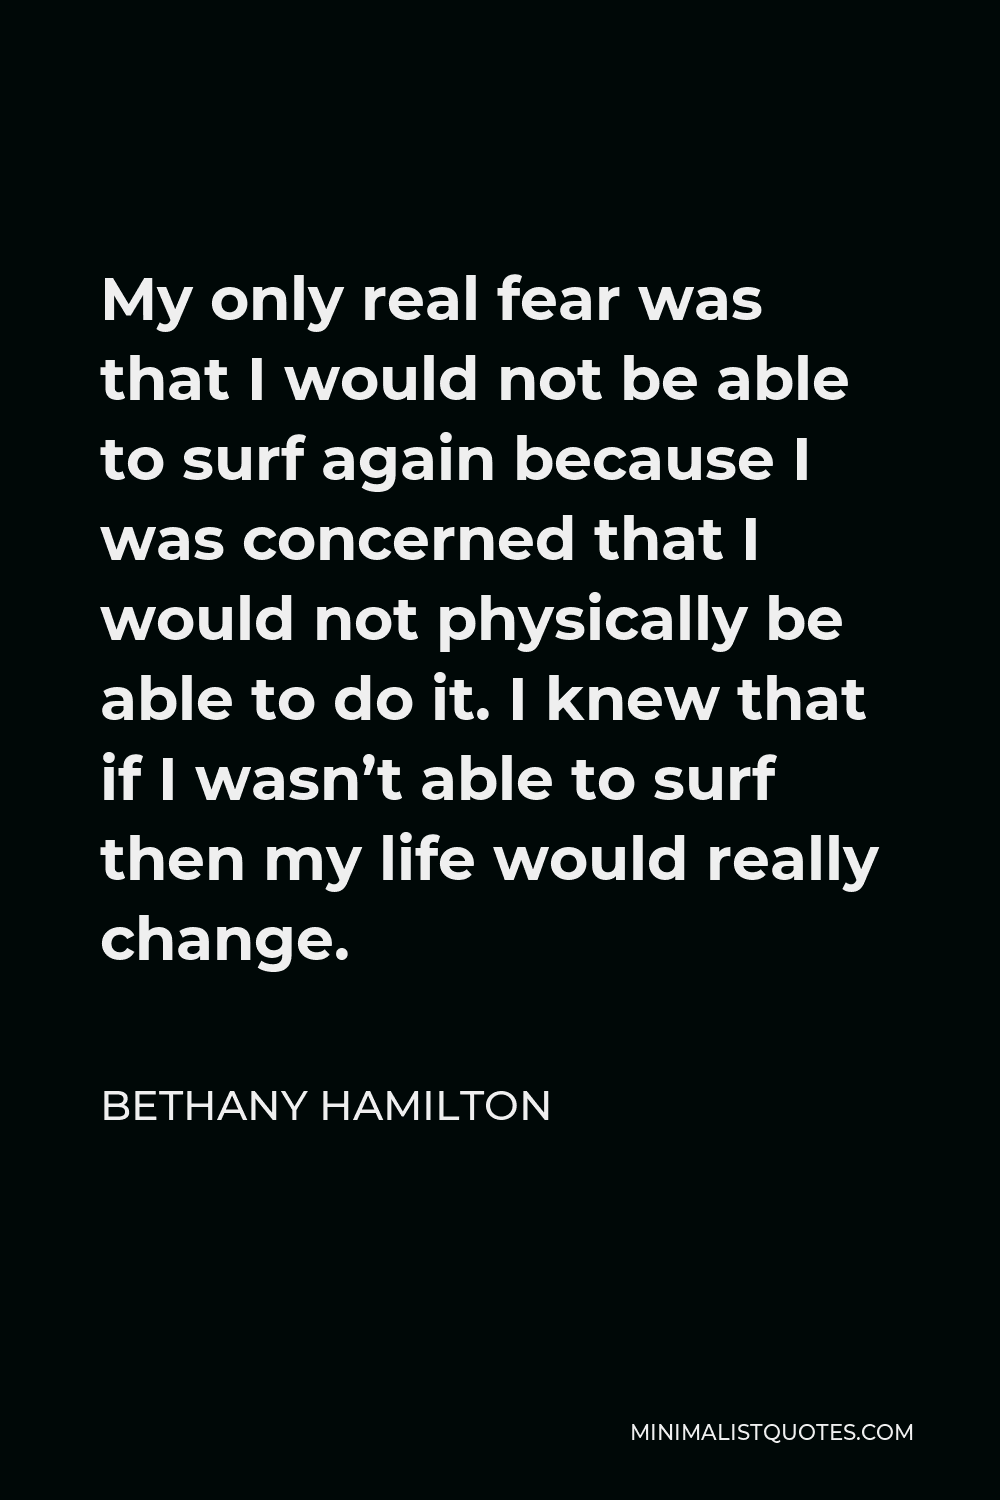 Bethany Hamilton Quote - My only real fear was that I would not be able to surf again because I was concerned that I would not physically be able to do it. I knew that if I wasn’t able to surf then my life would really change.